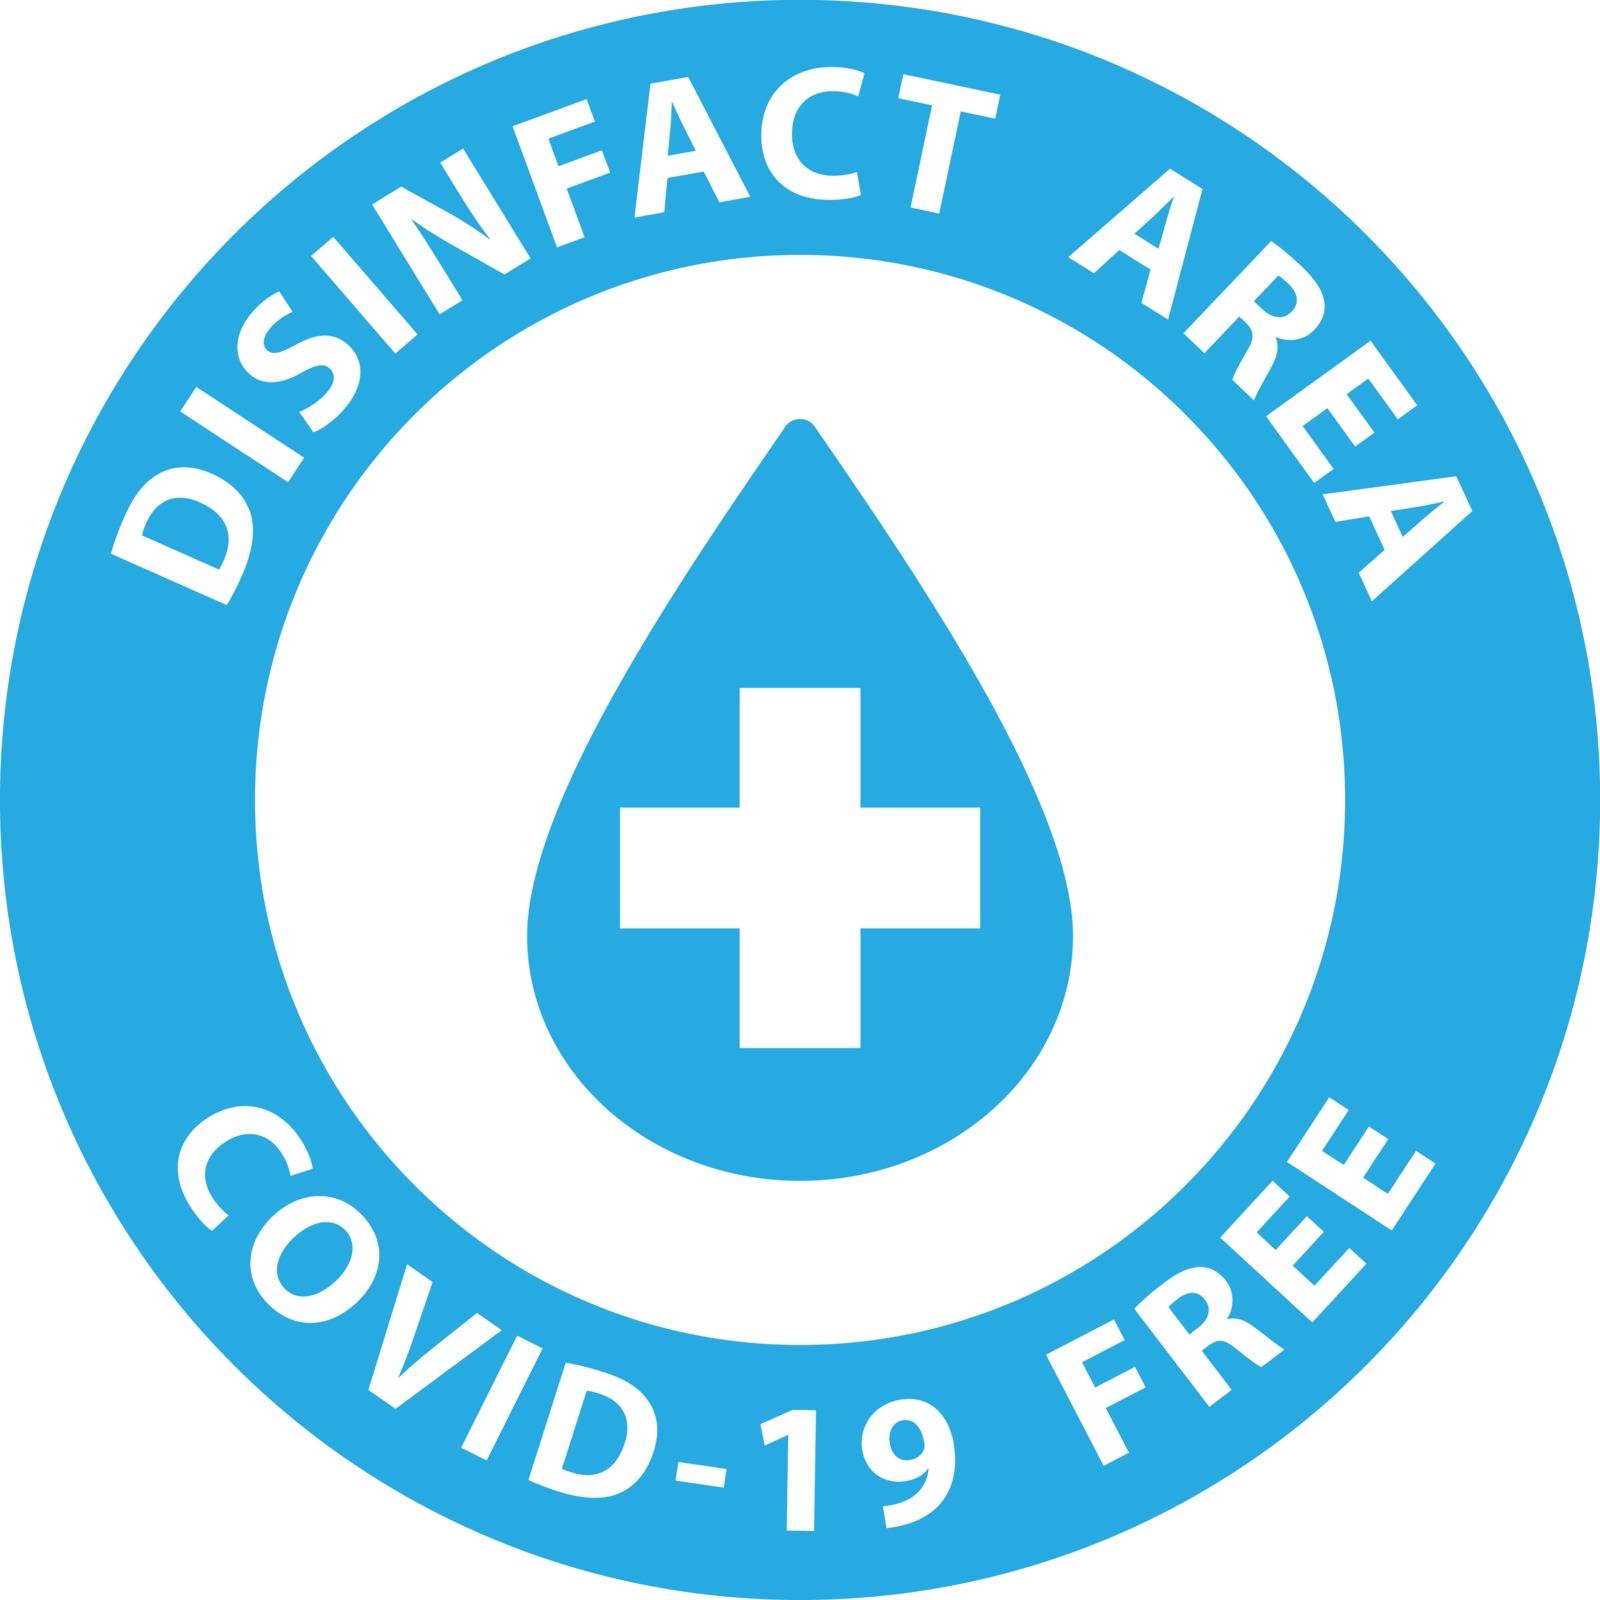  Round symbol for disinfected areas of Covid-19. Covid free zone by kanate